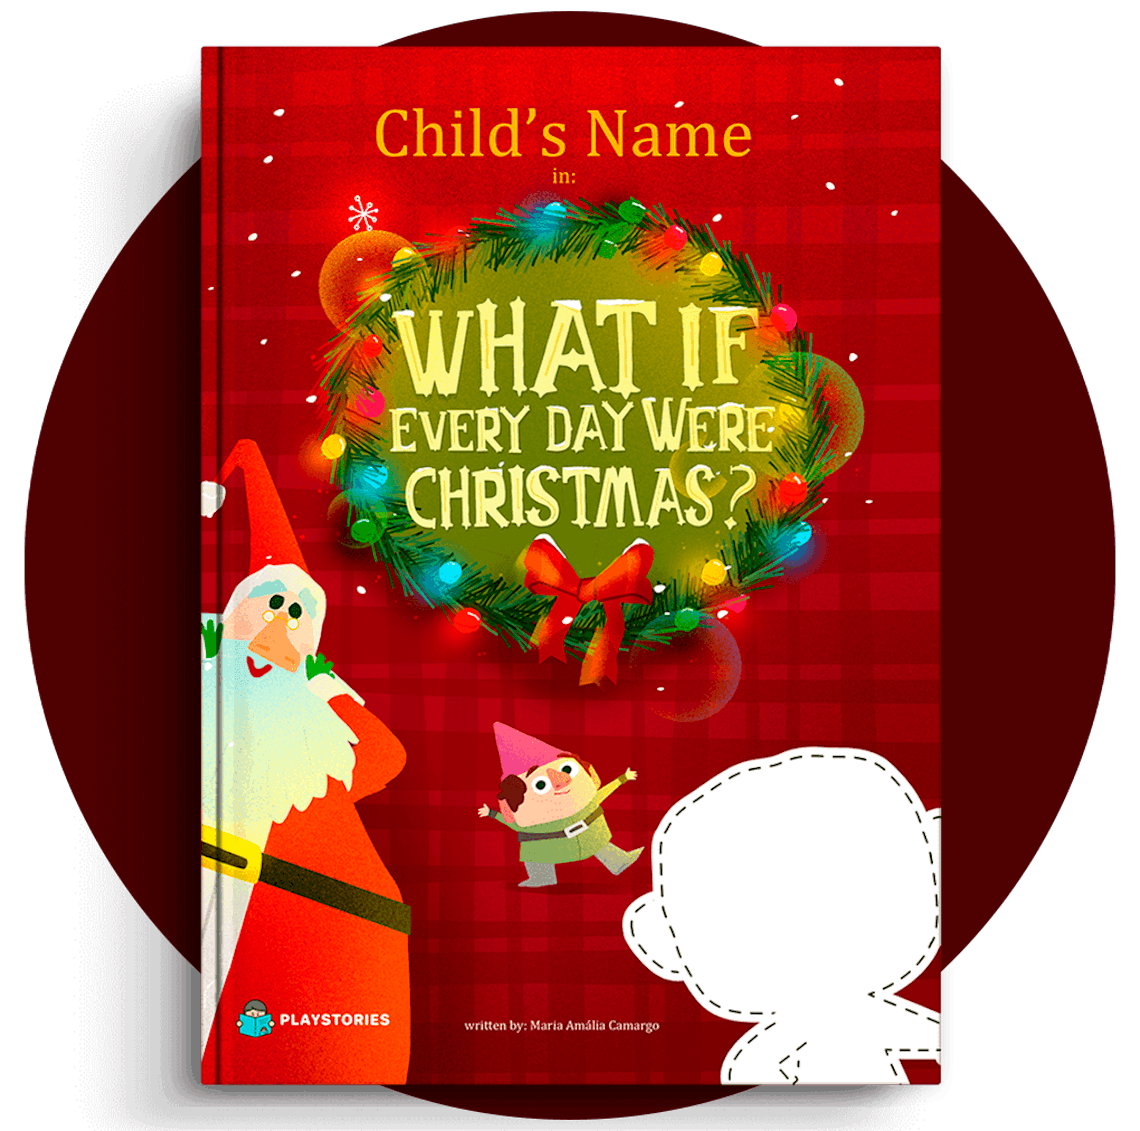 What If Every Day Were Christmas - Playstories